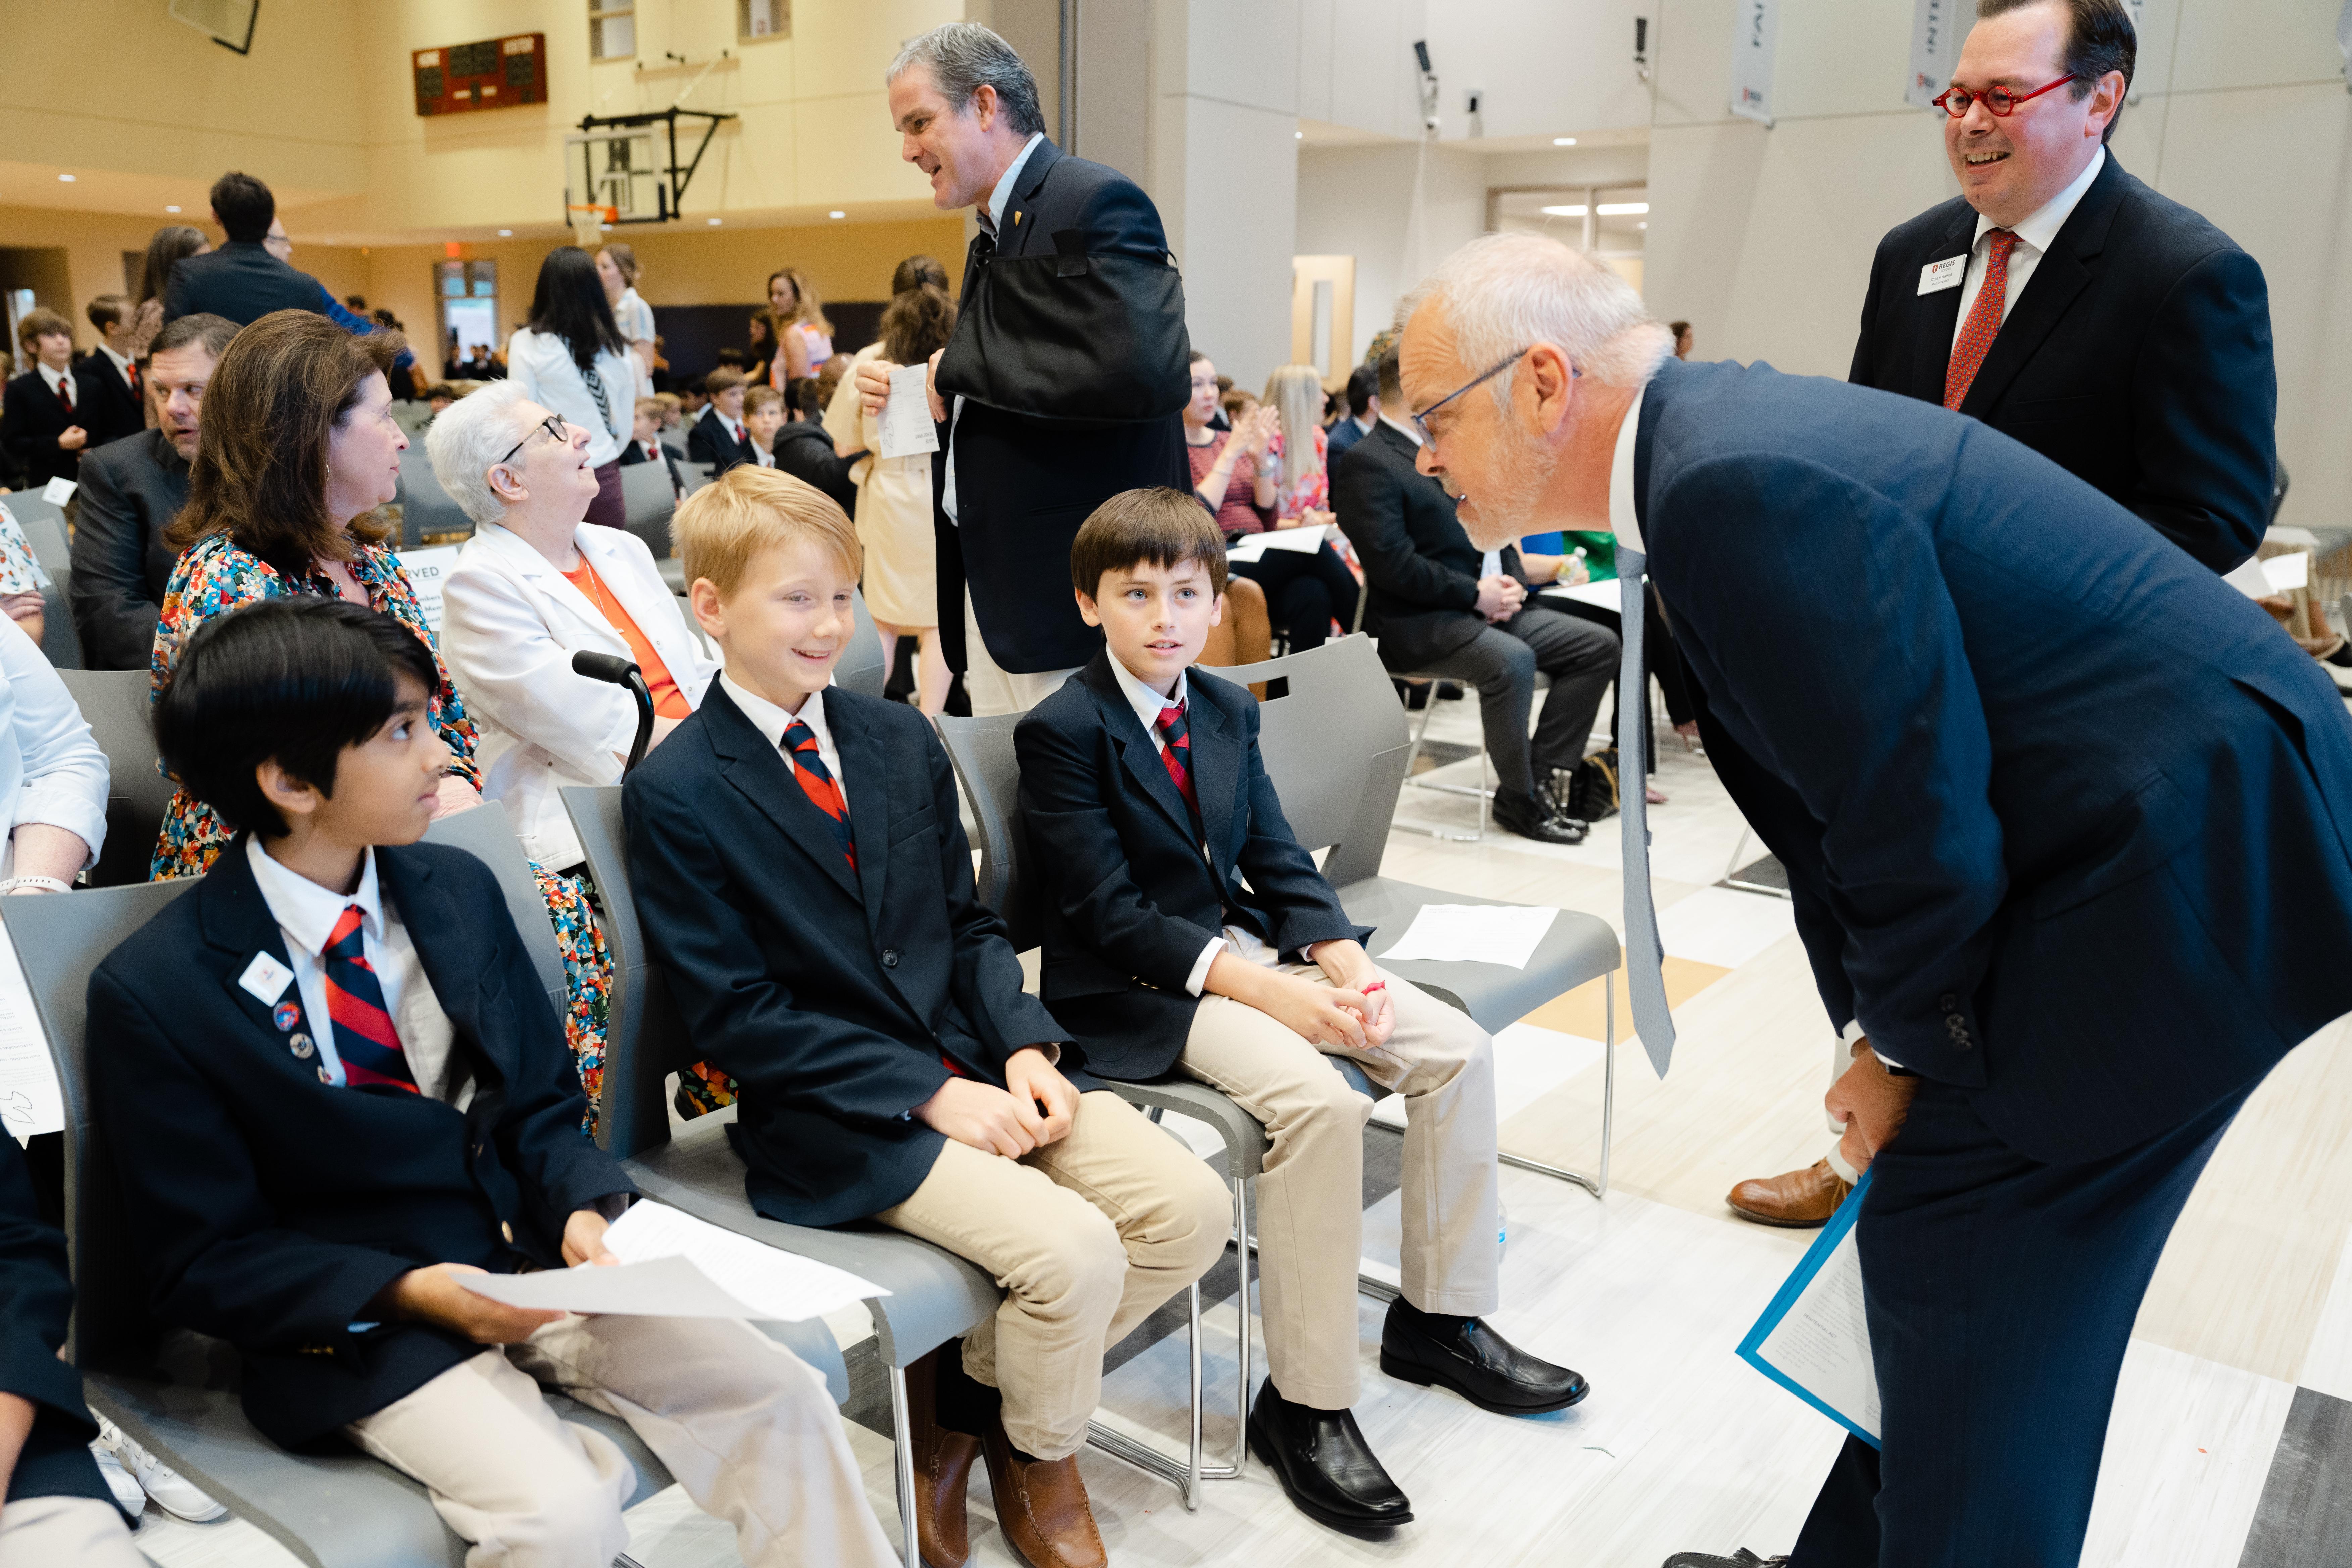 Nat Wilburn and Steven R. Turner, Jr. (right) greet Regis students before Mass. (Photo courtesy of The Regis School of the Sacred Heart)